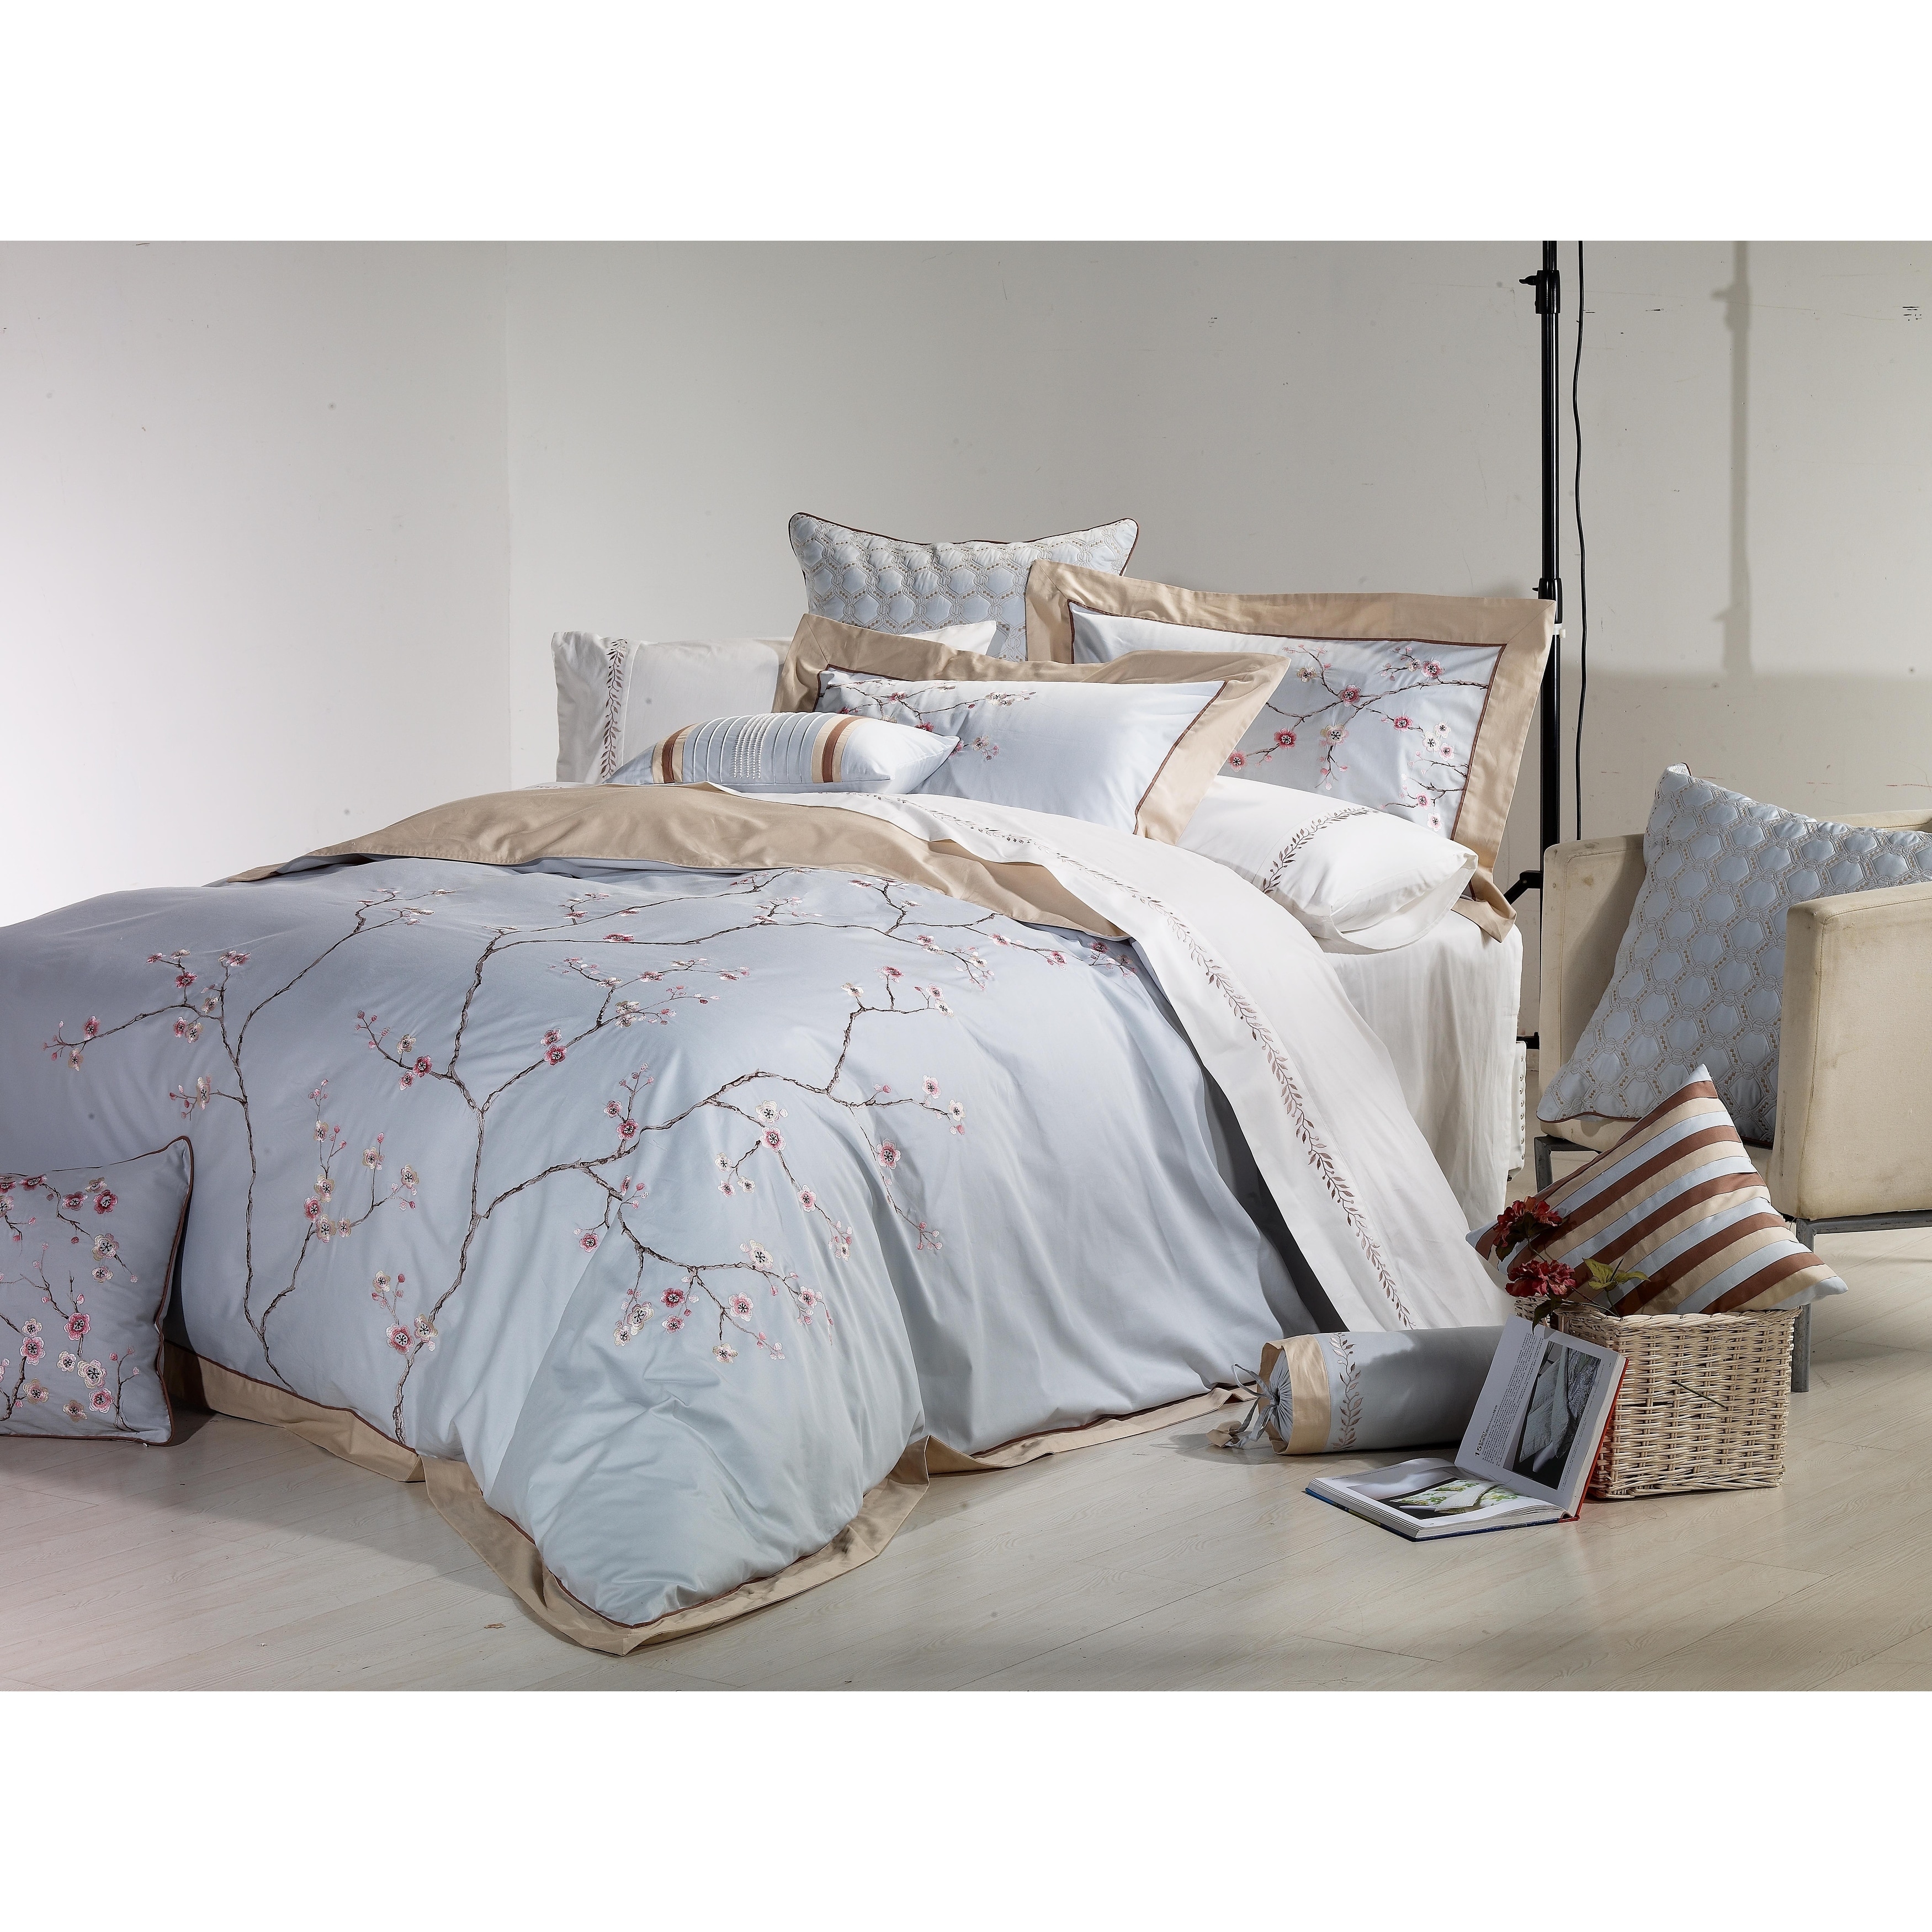 Blue Embroidered Duvet Covers and Sets - Bed Bath & Beyond